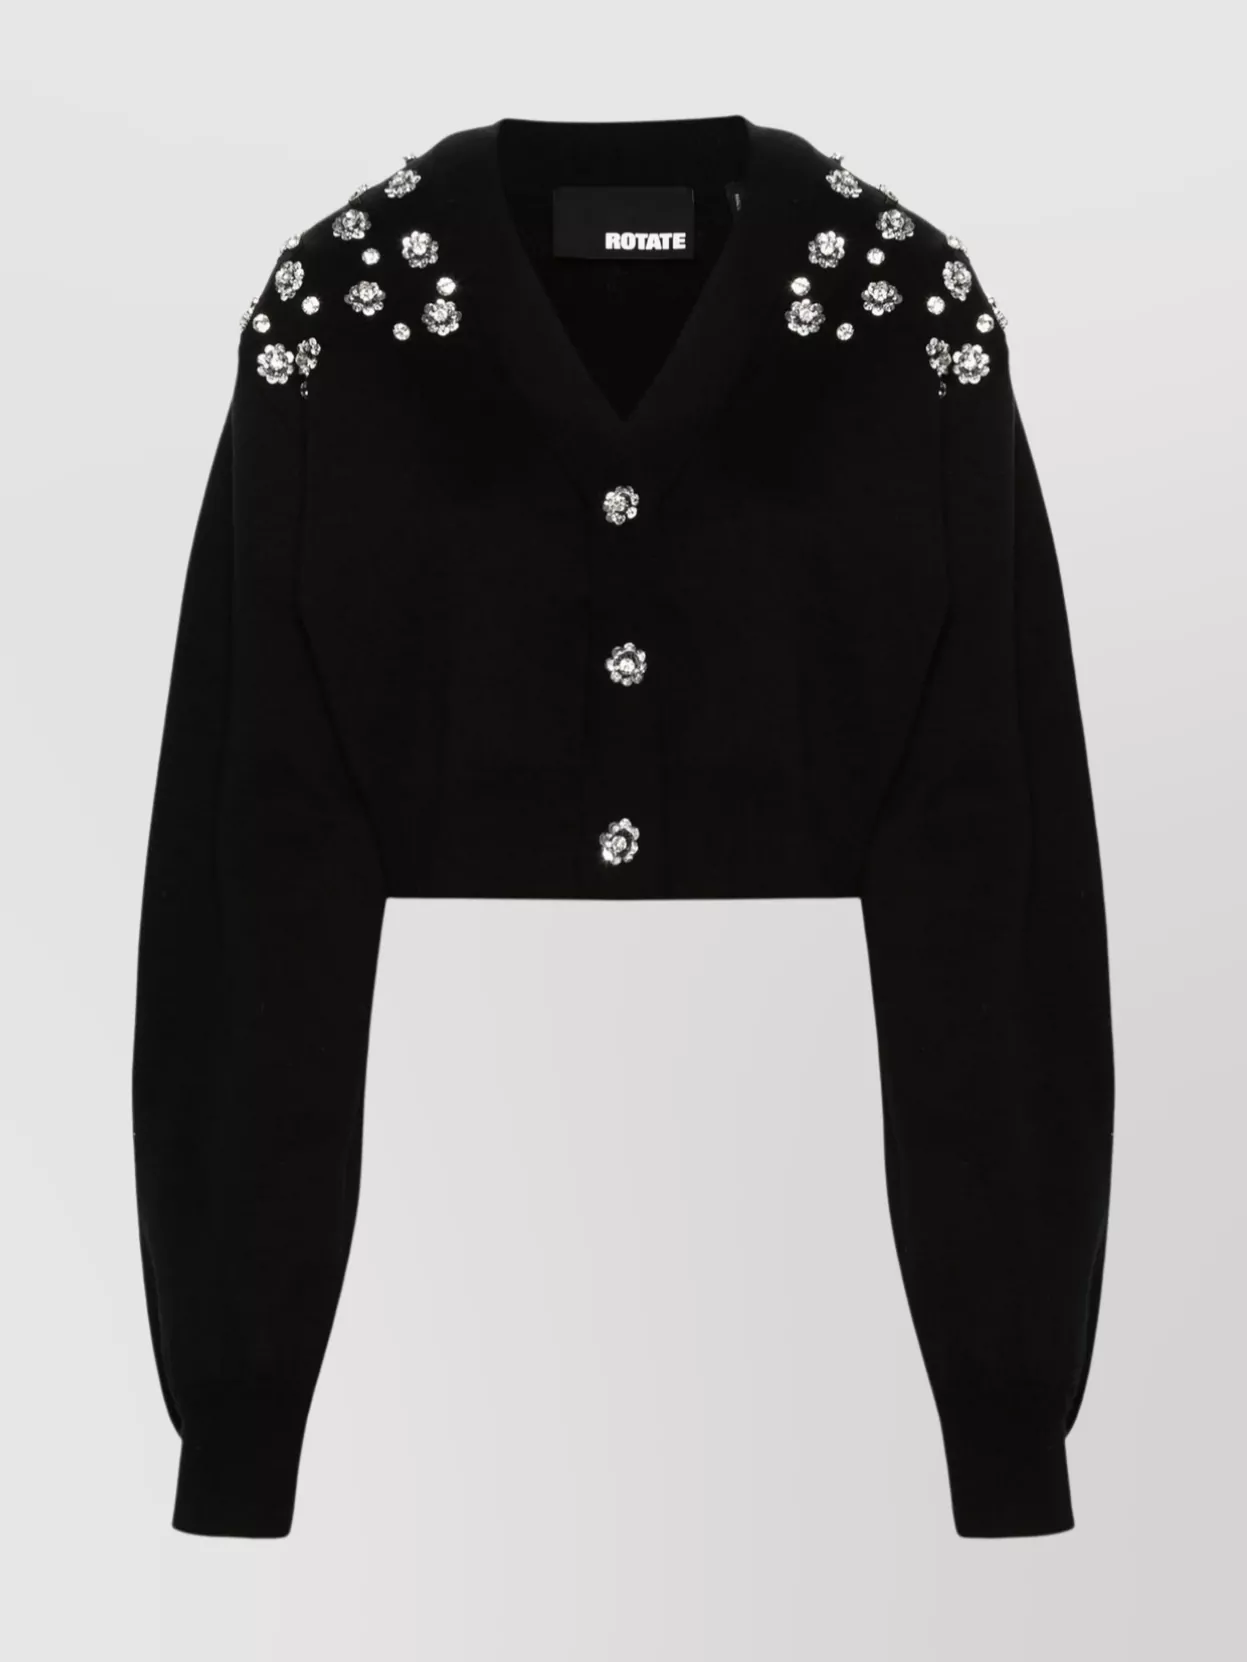 Rotate Birger Christensen Cropped Knitwear With Oversized V-neck Sleeves In Black